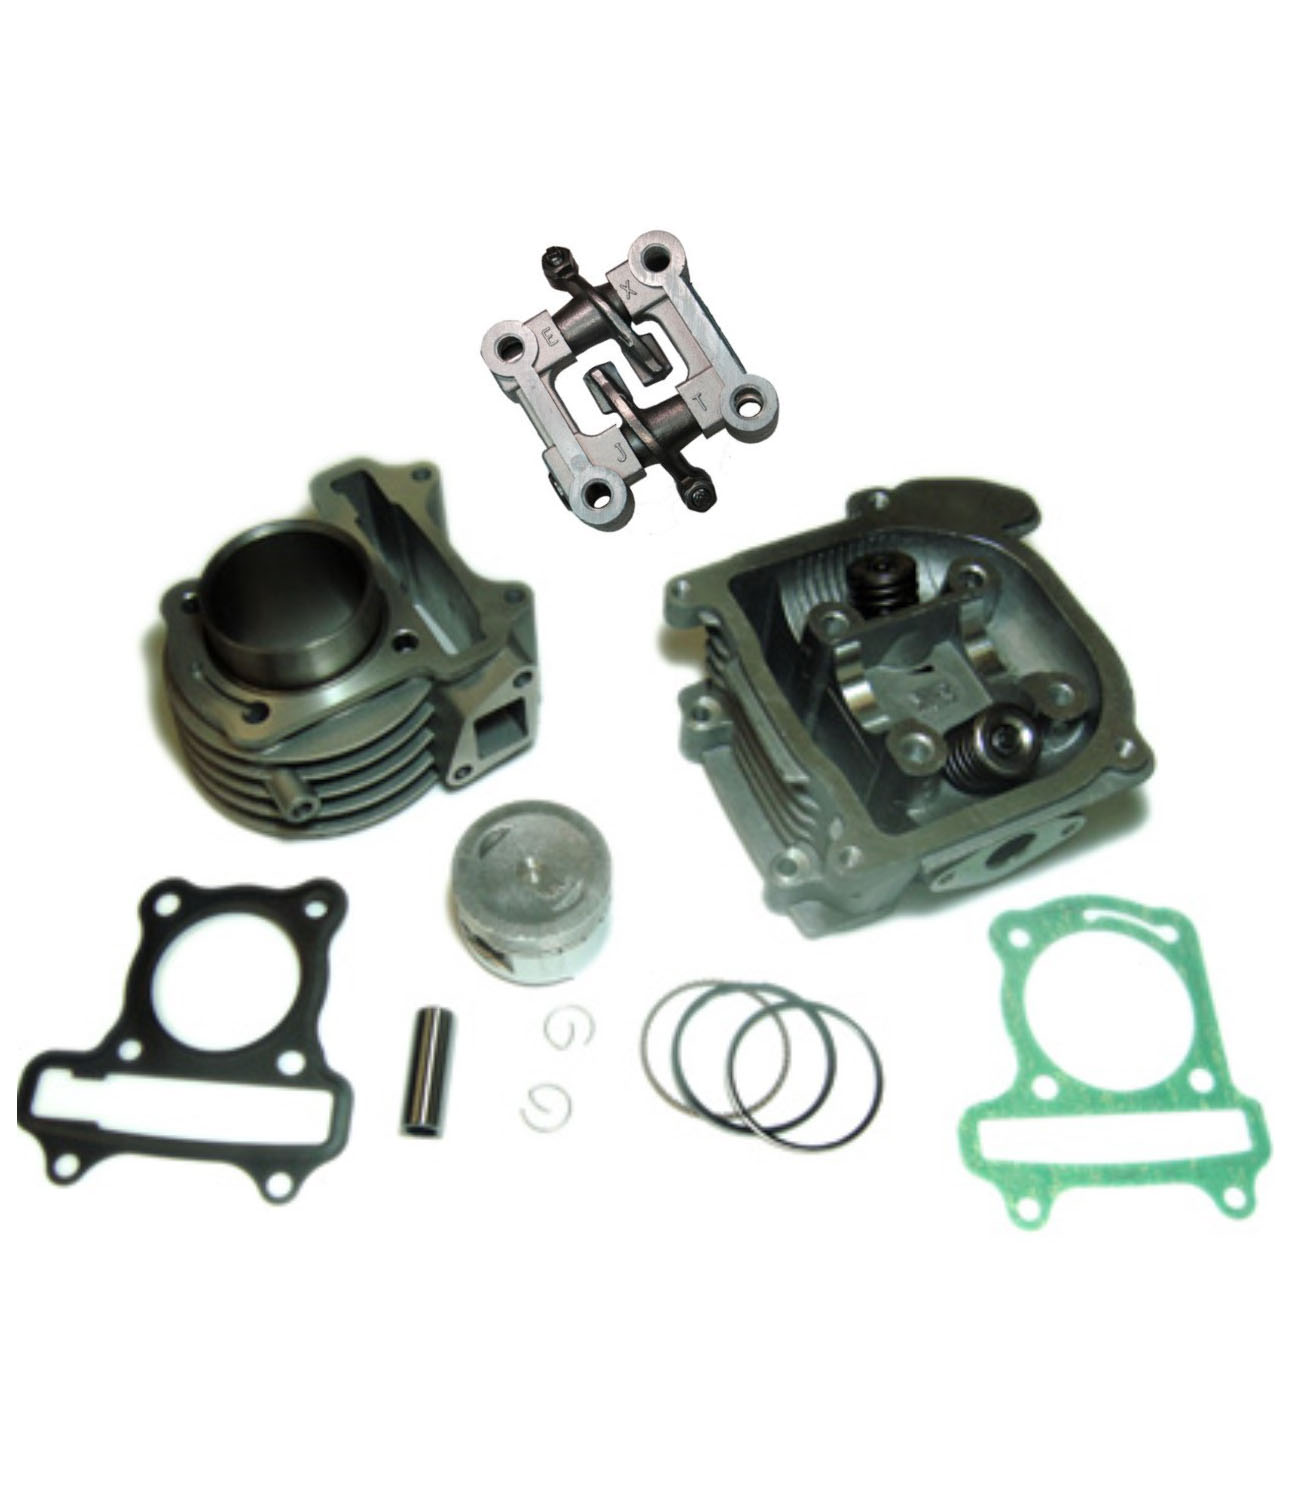 80cc Cylinder Piston Top End Kit With Non-EGR Head For GY6-50 QMB139 Chinese Scooter Motors. Bore=47mm